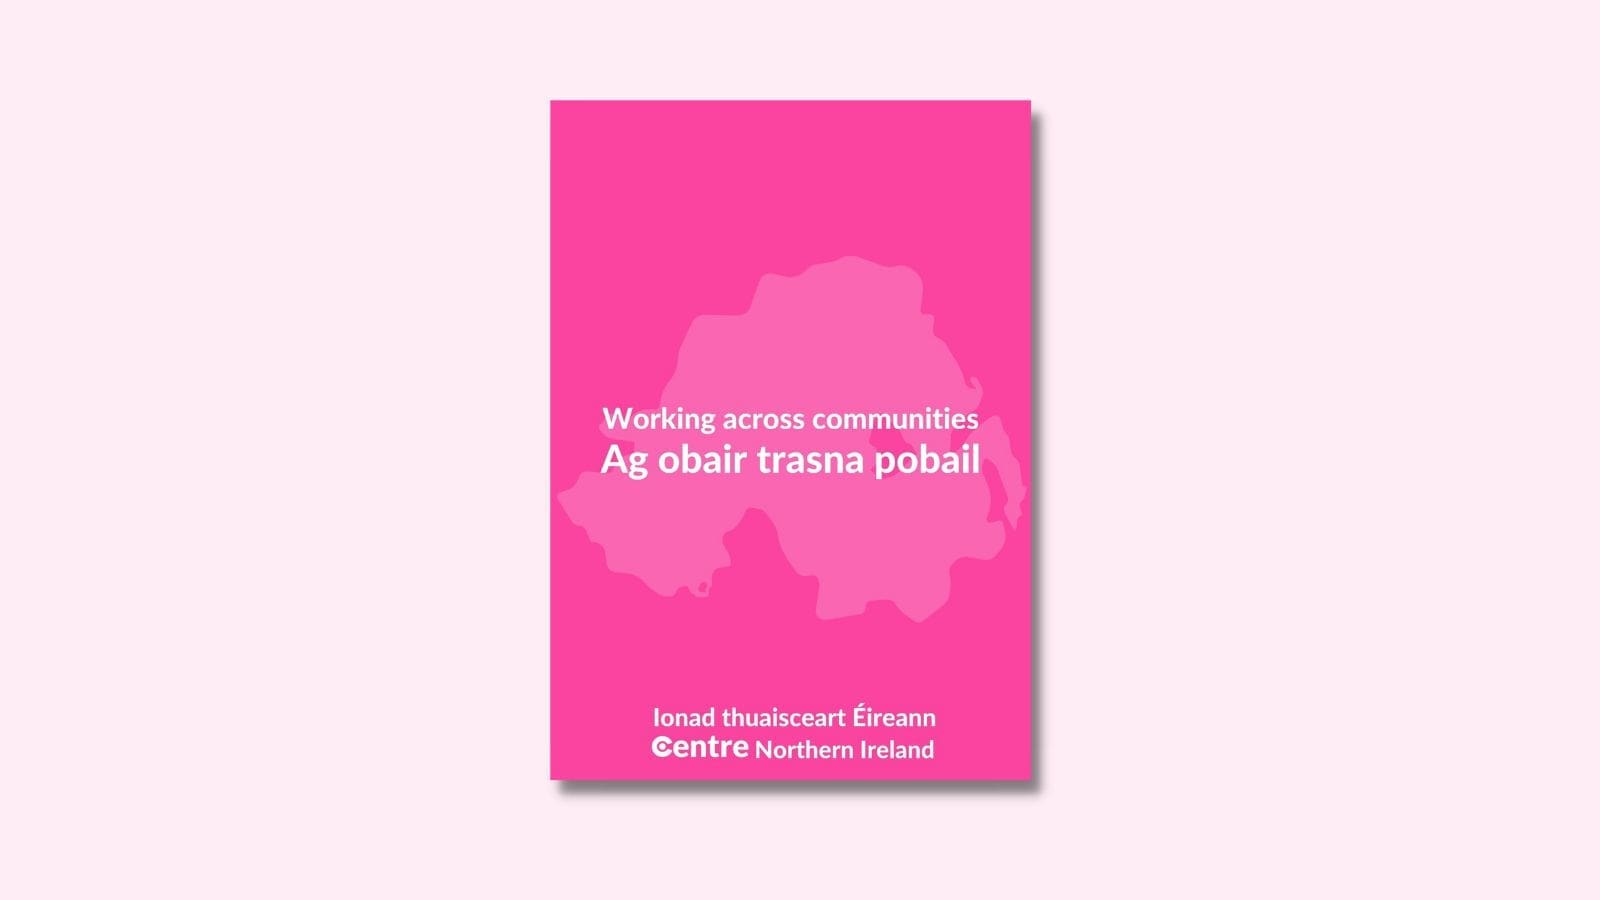 A light pink background with a pink document in the middle. In the middle is a light pink map of Northern Ireland. On top of this is white writing saying "Working across communities" and under this "Ag obair trasna pobail". At the bottom is "Ionad thusisceart Èireann" and below this the Centre logo in white with the words "Northern Ireland" next to it.